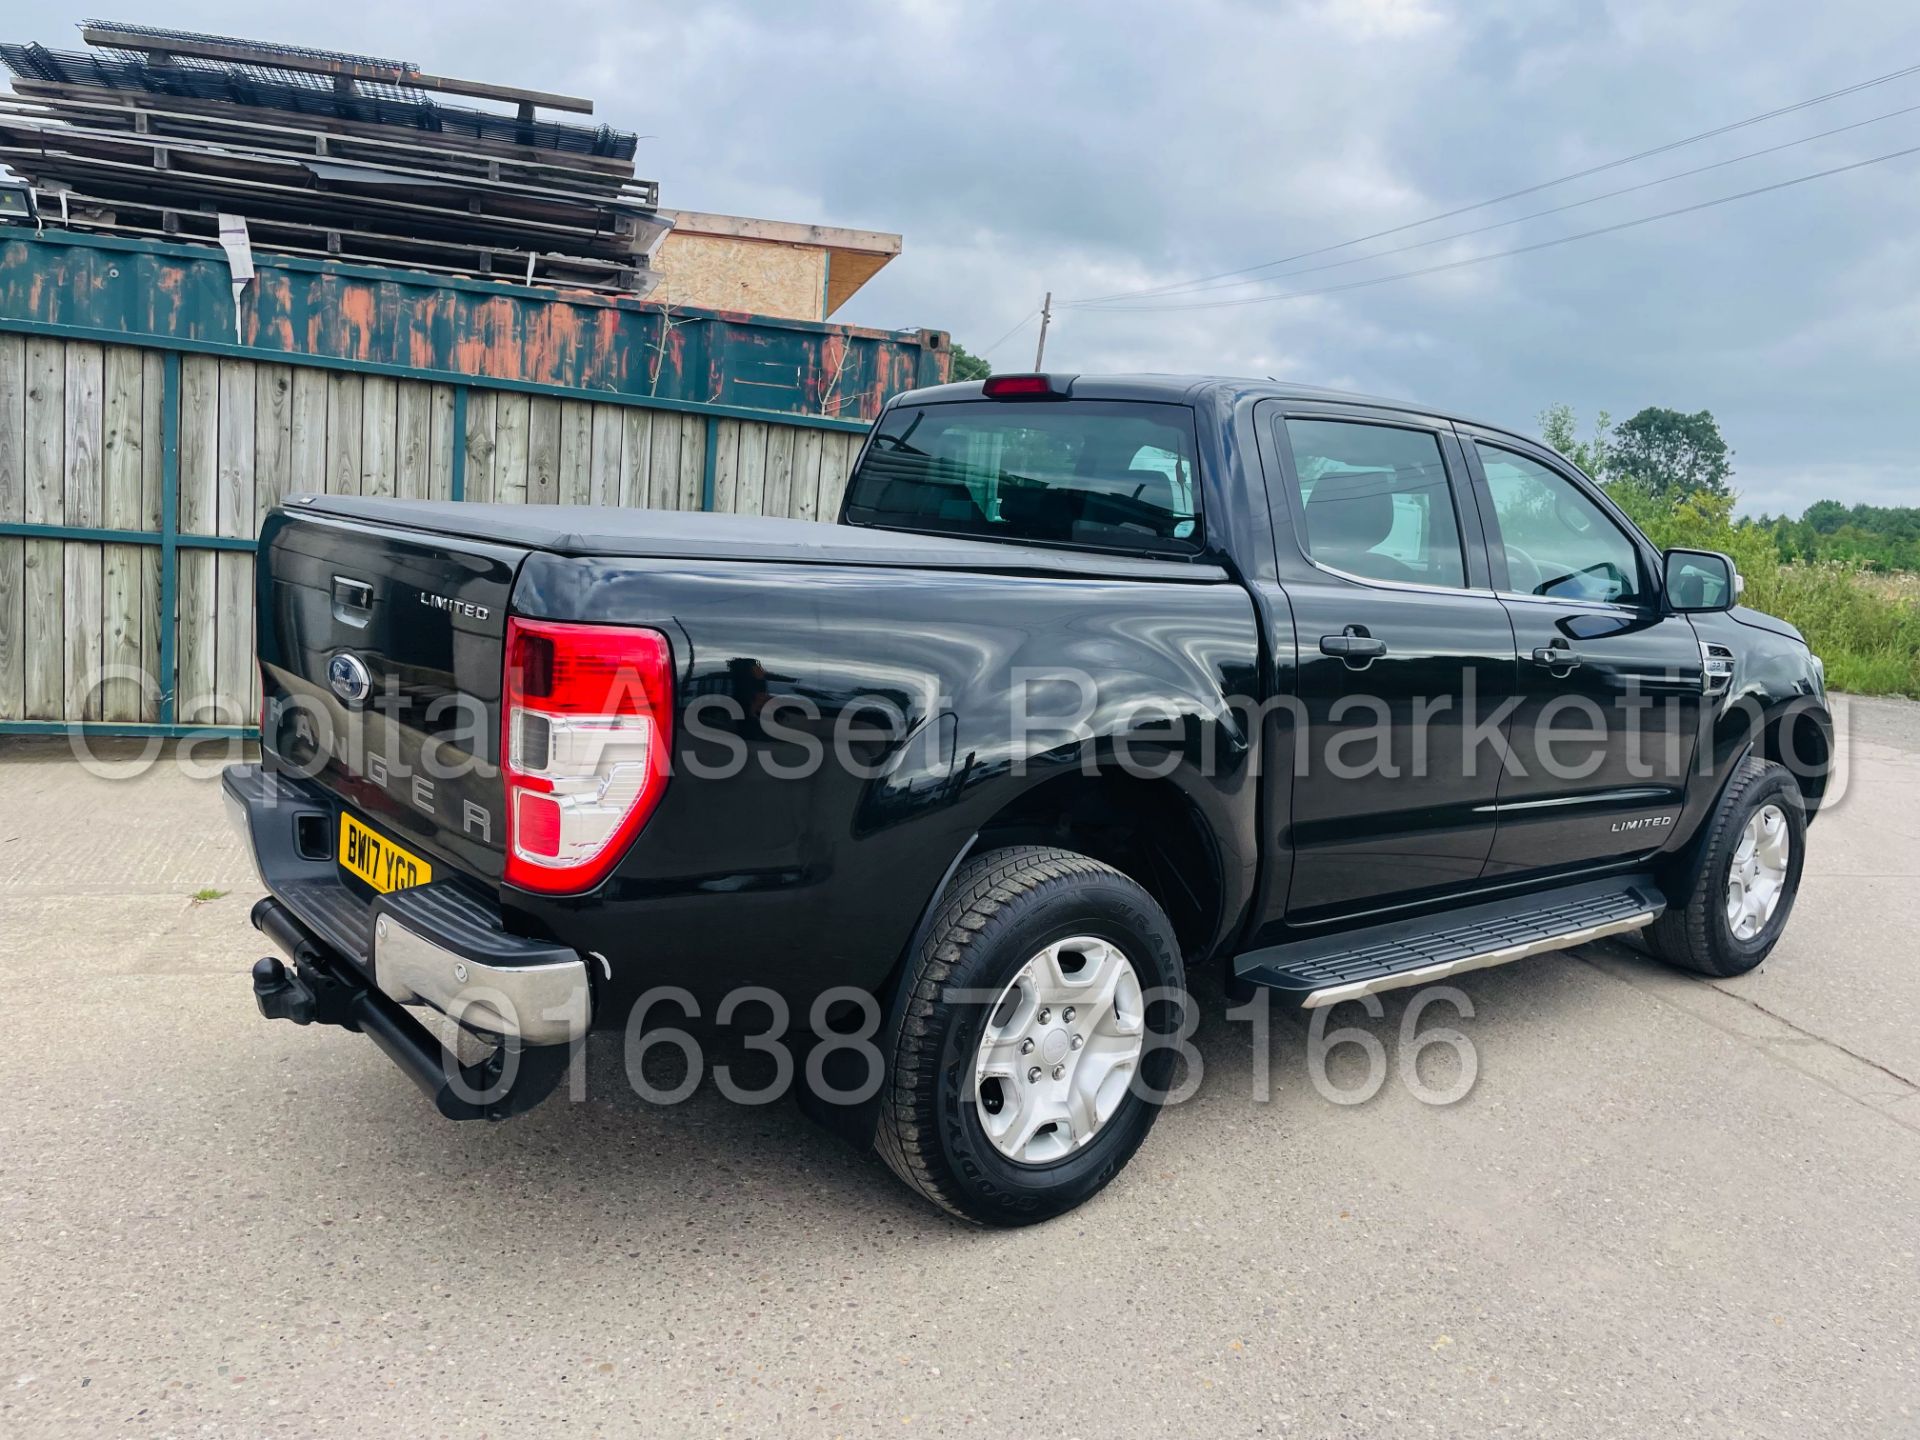 (On Sale) FORD RANGER *LIMITED EDITION* DOUBLE CAB PICK-UP (2017 -EURO 6) 'AUTO - LEATHER' (1 OWNER) - Image 13 of 56